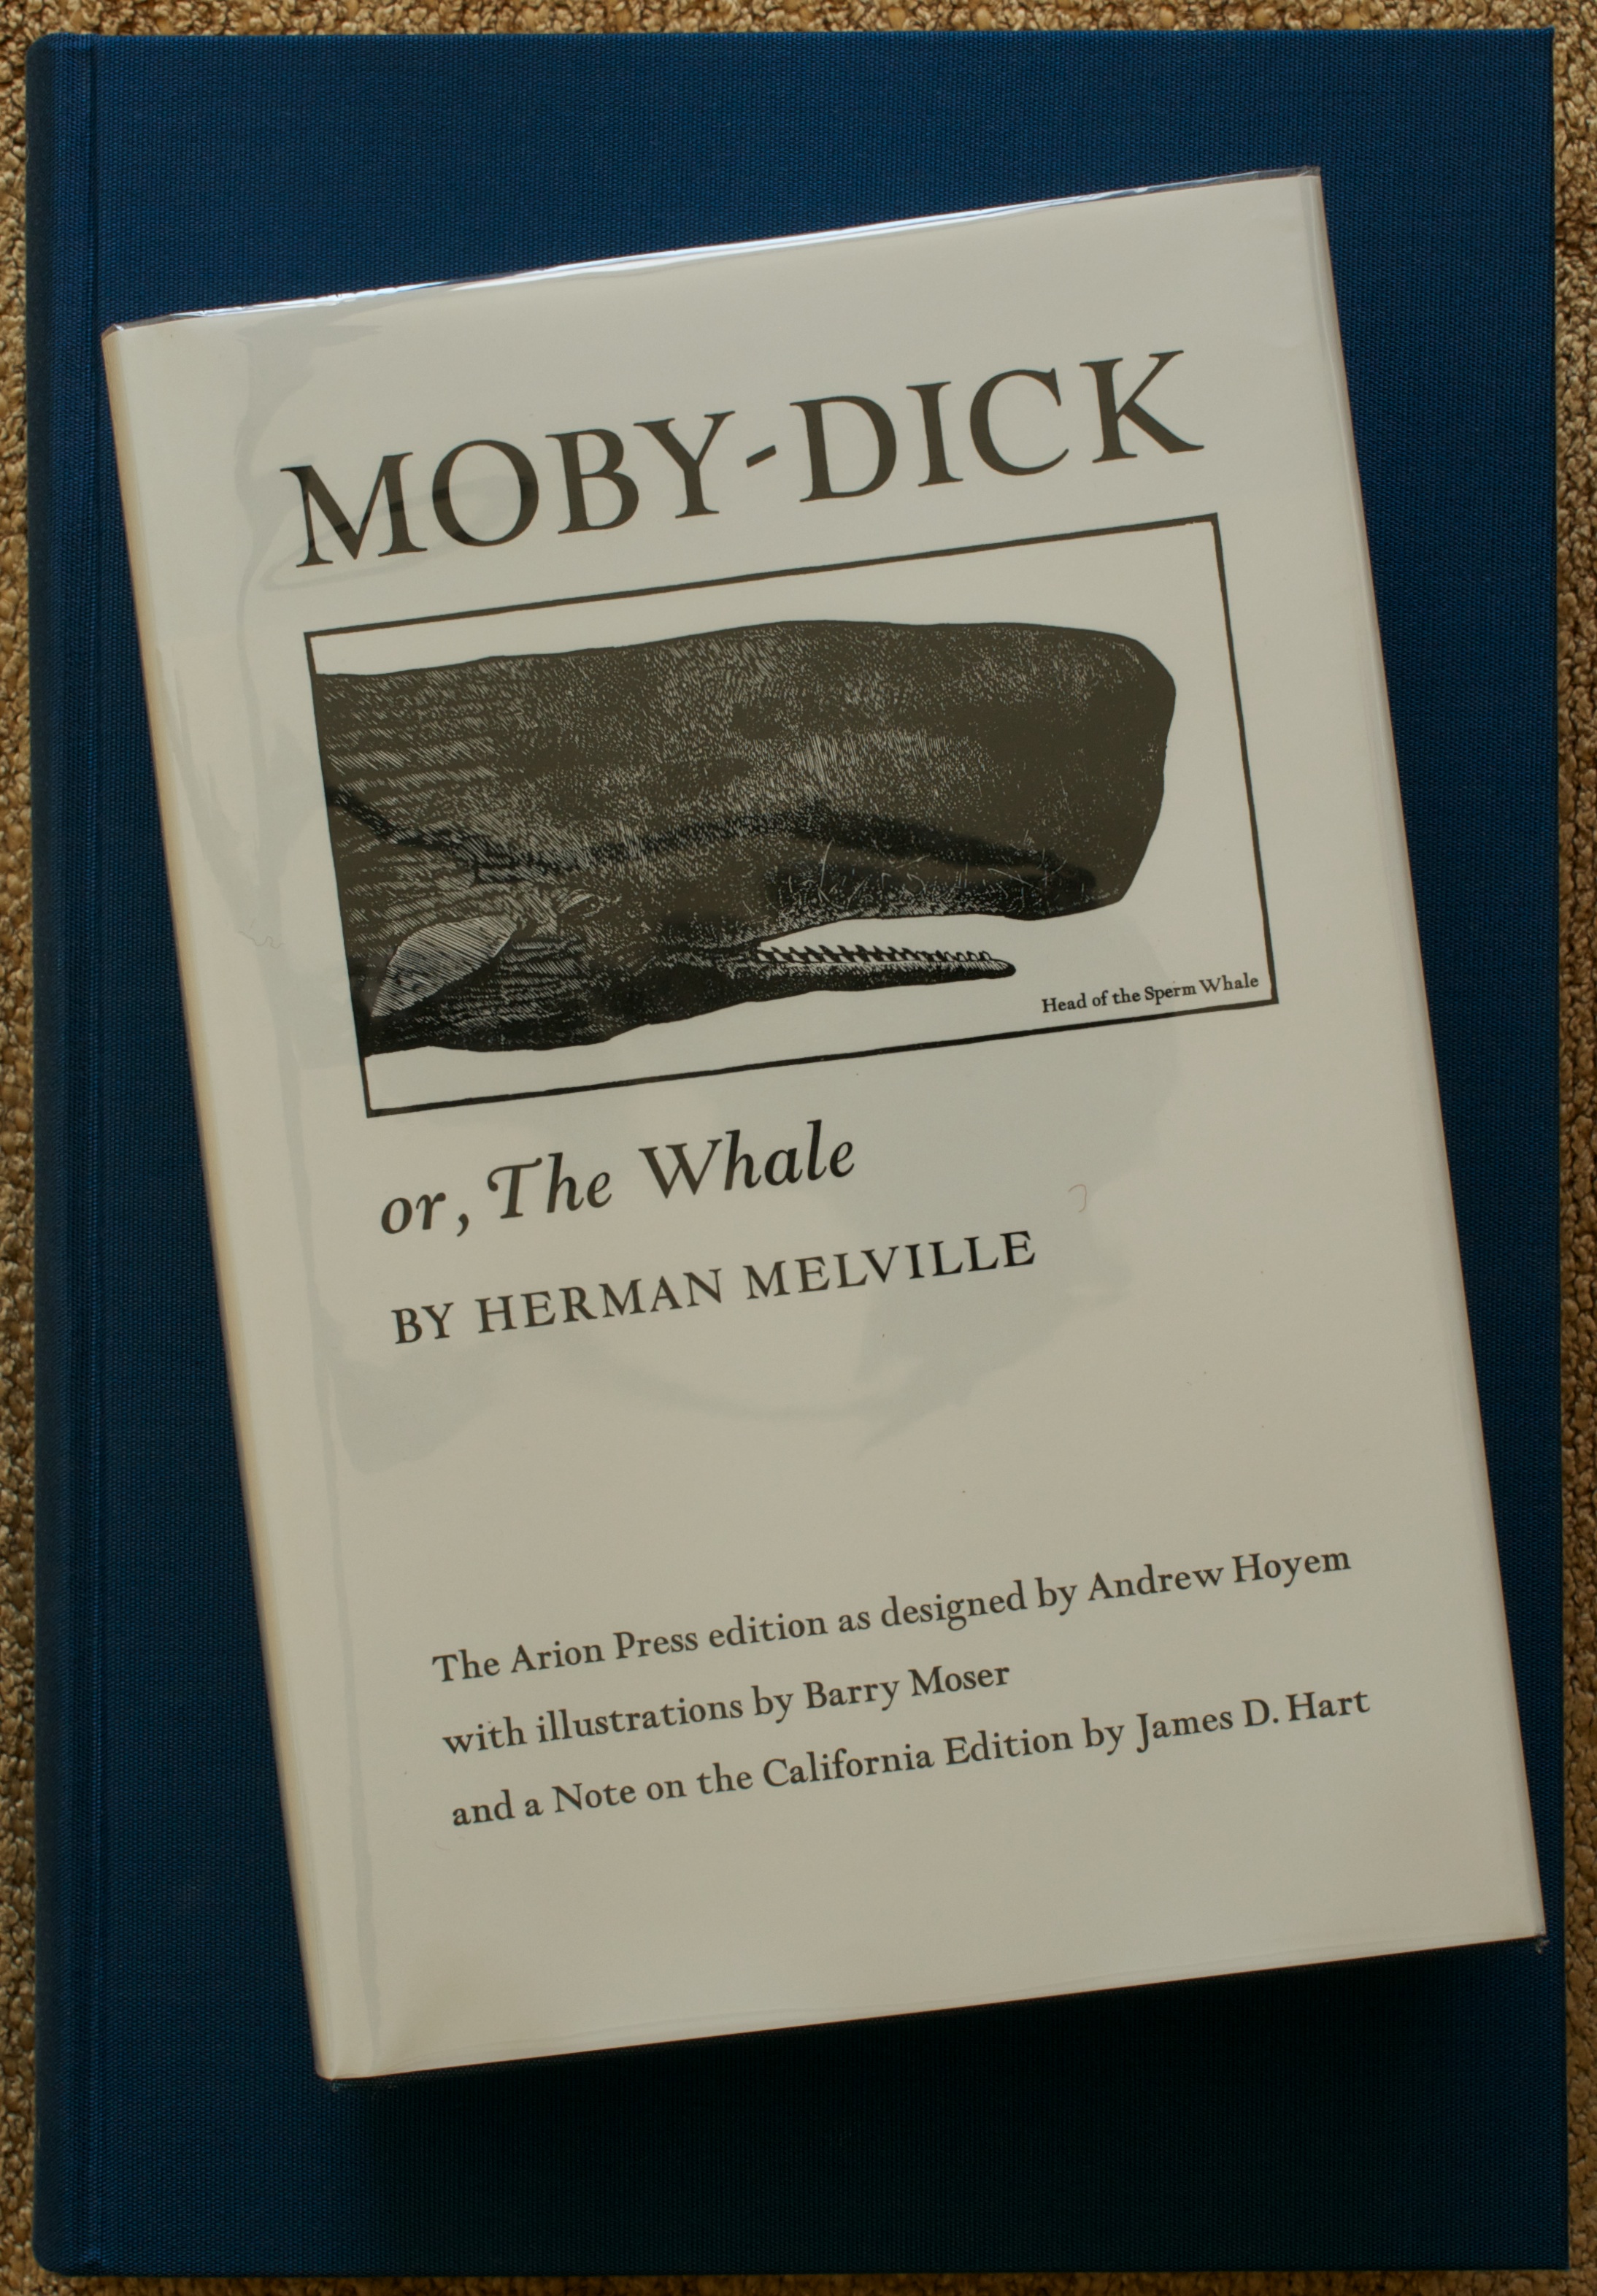 Analogy of moby dick